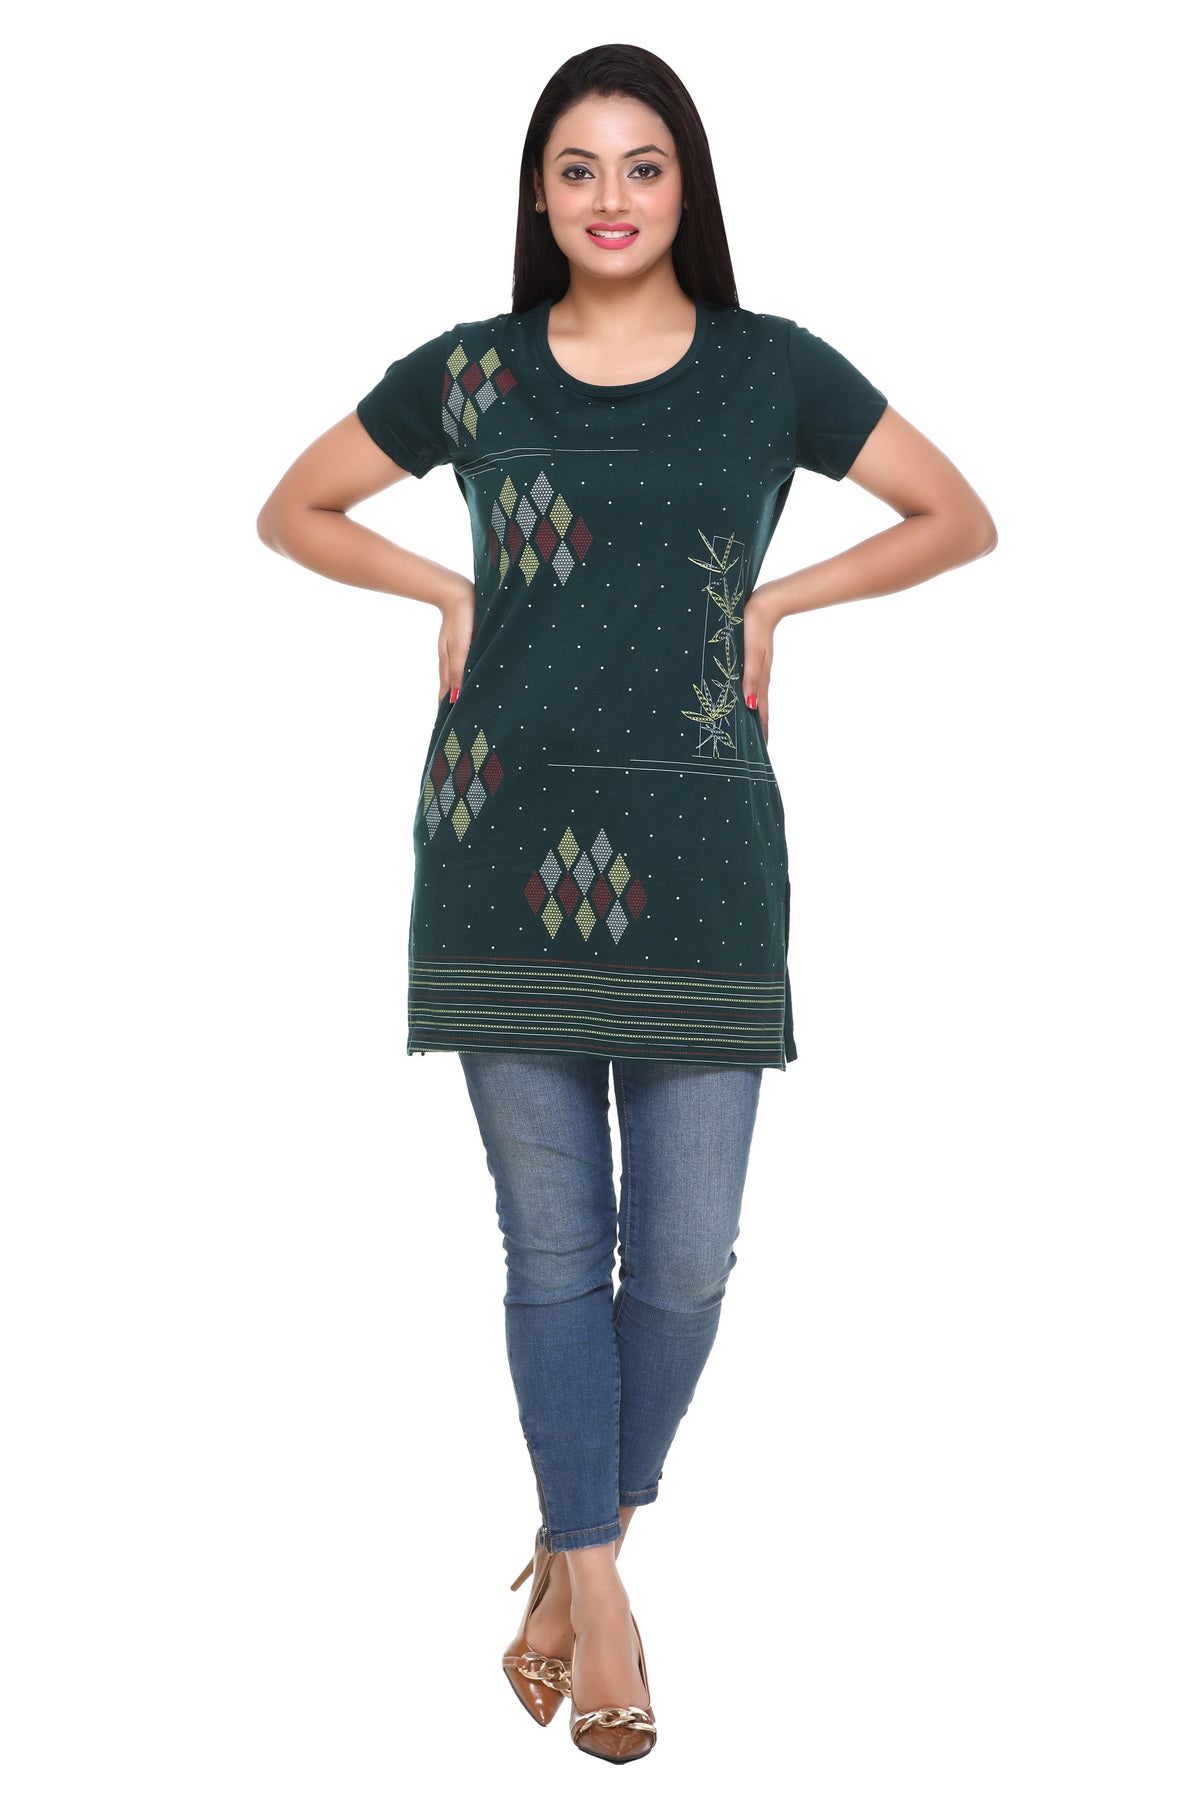 Cotton Printed Long T-shirts For Women Half Sleeve - Bottle Green